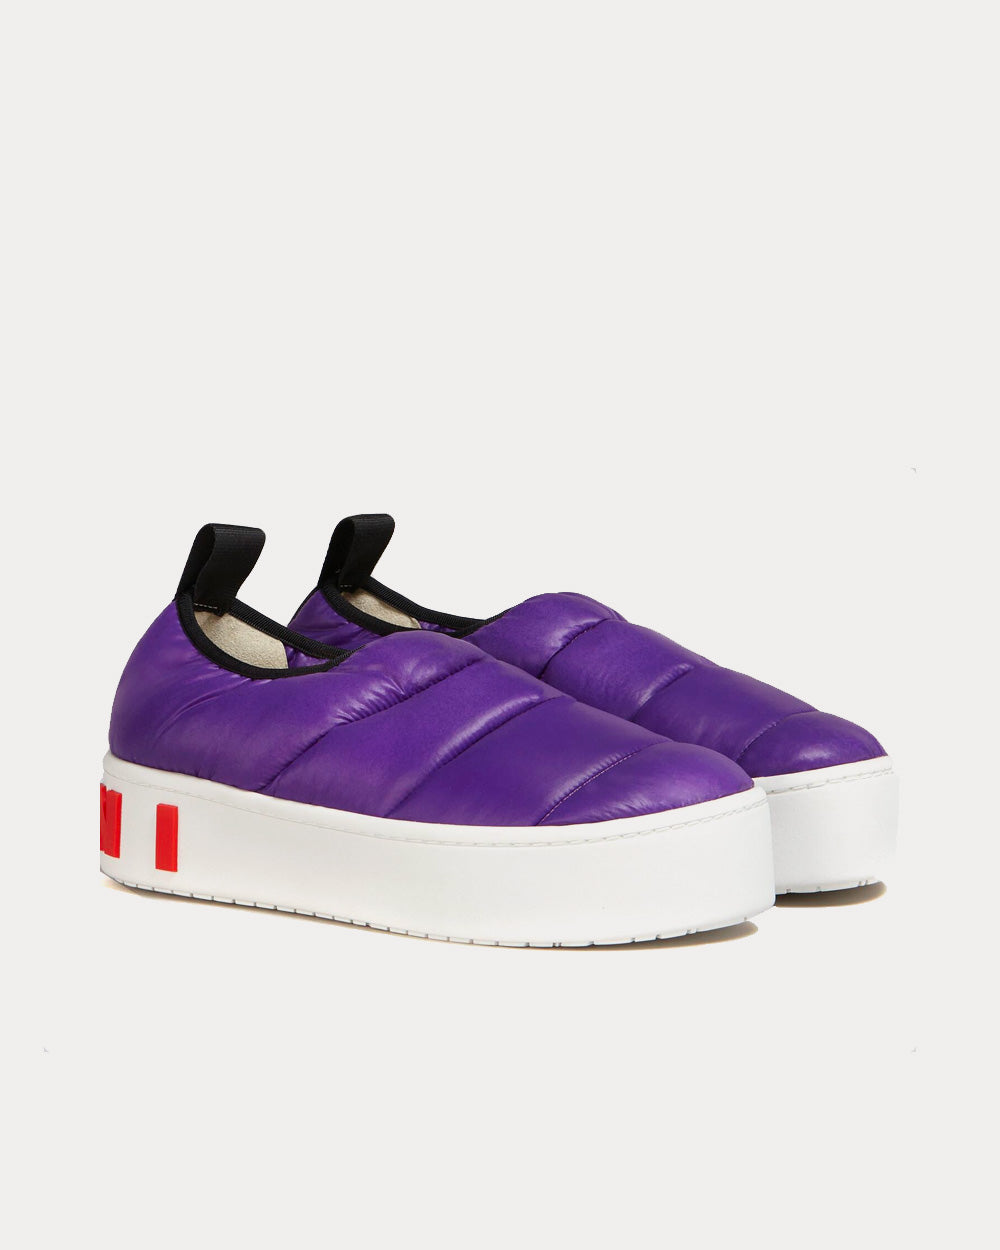 Marni - PAW Quilted Nylon Bright Violet Slip On Sneakers